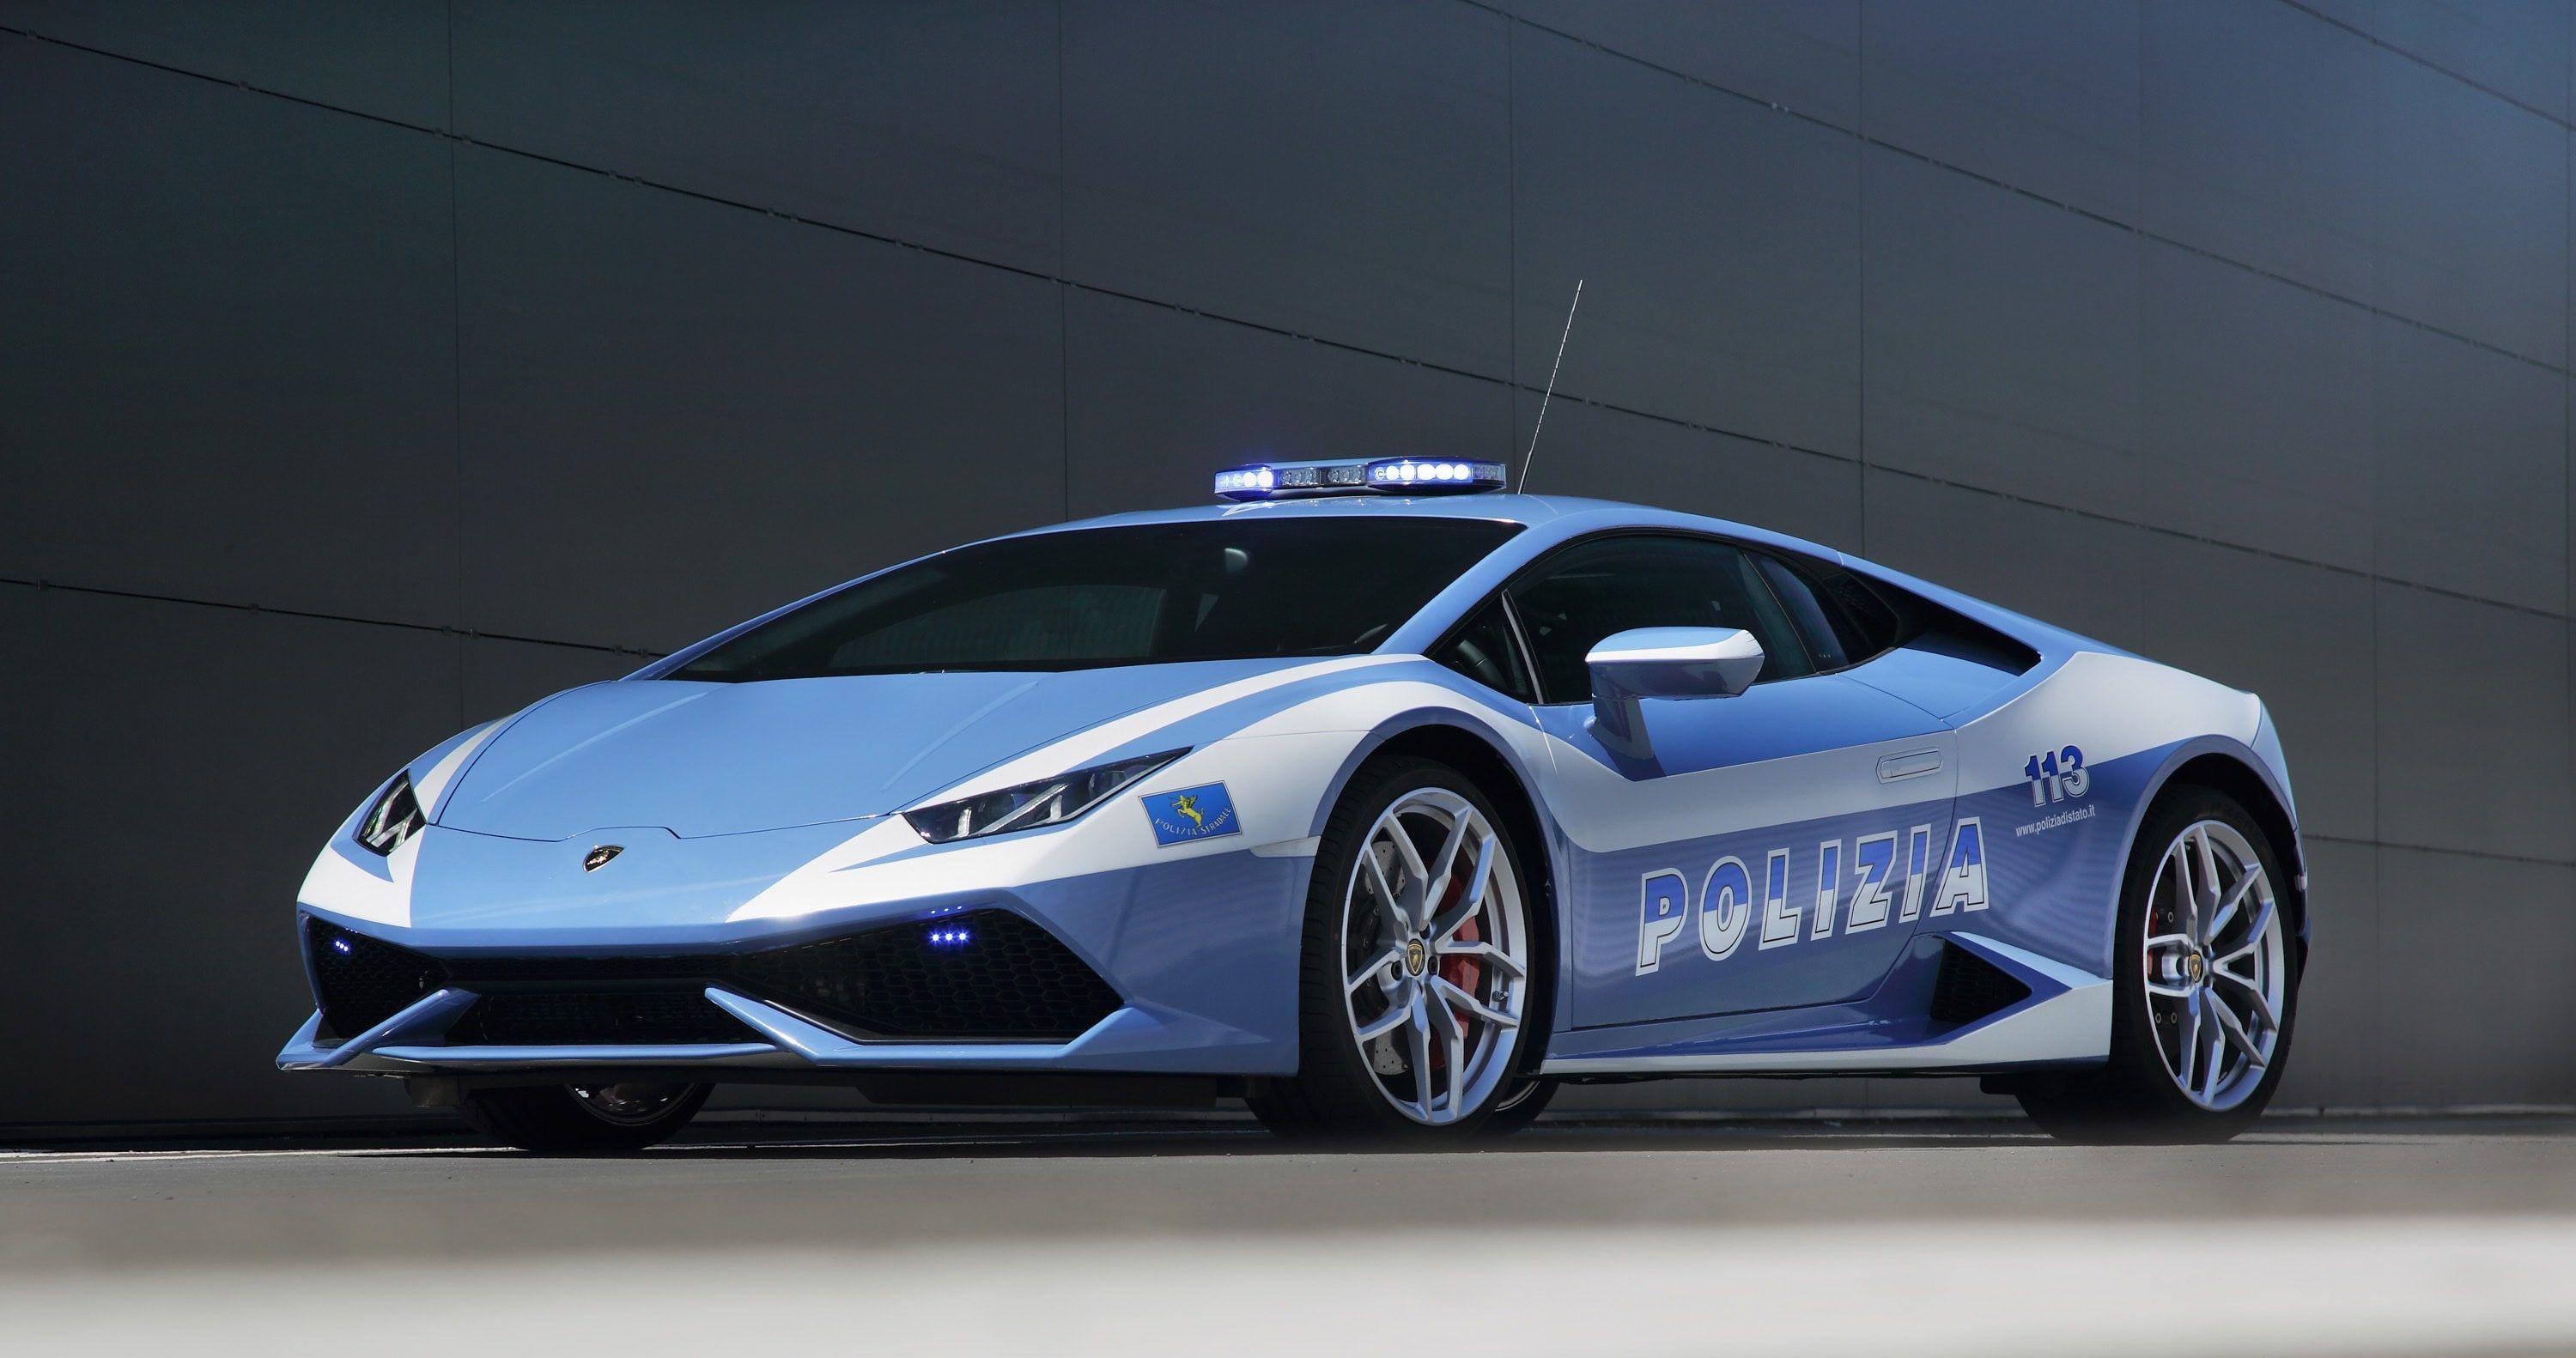 10 Weirdest Facts About Modern Police Cars Nobody Knows About